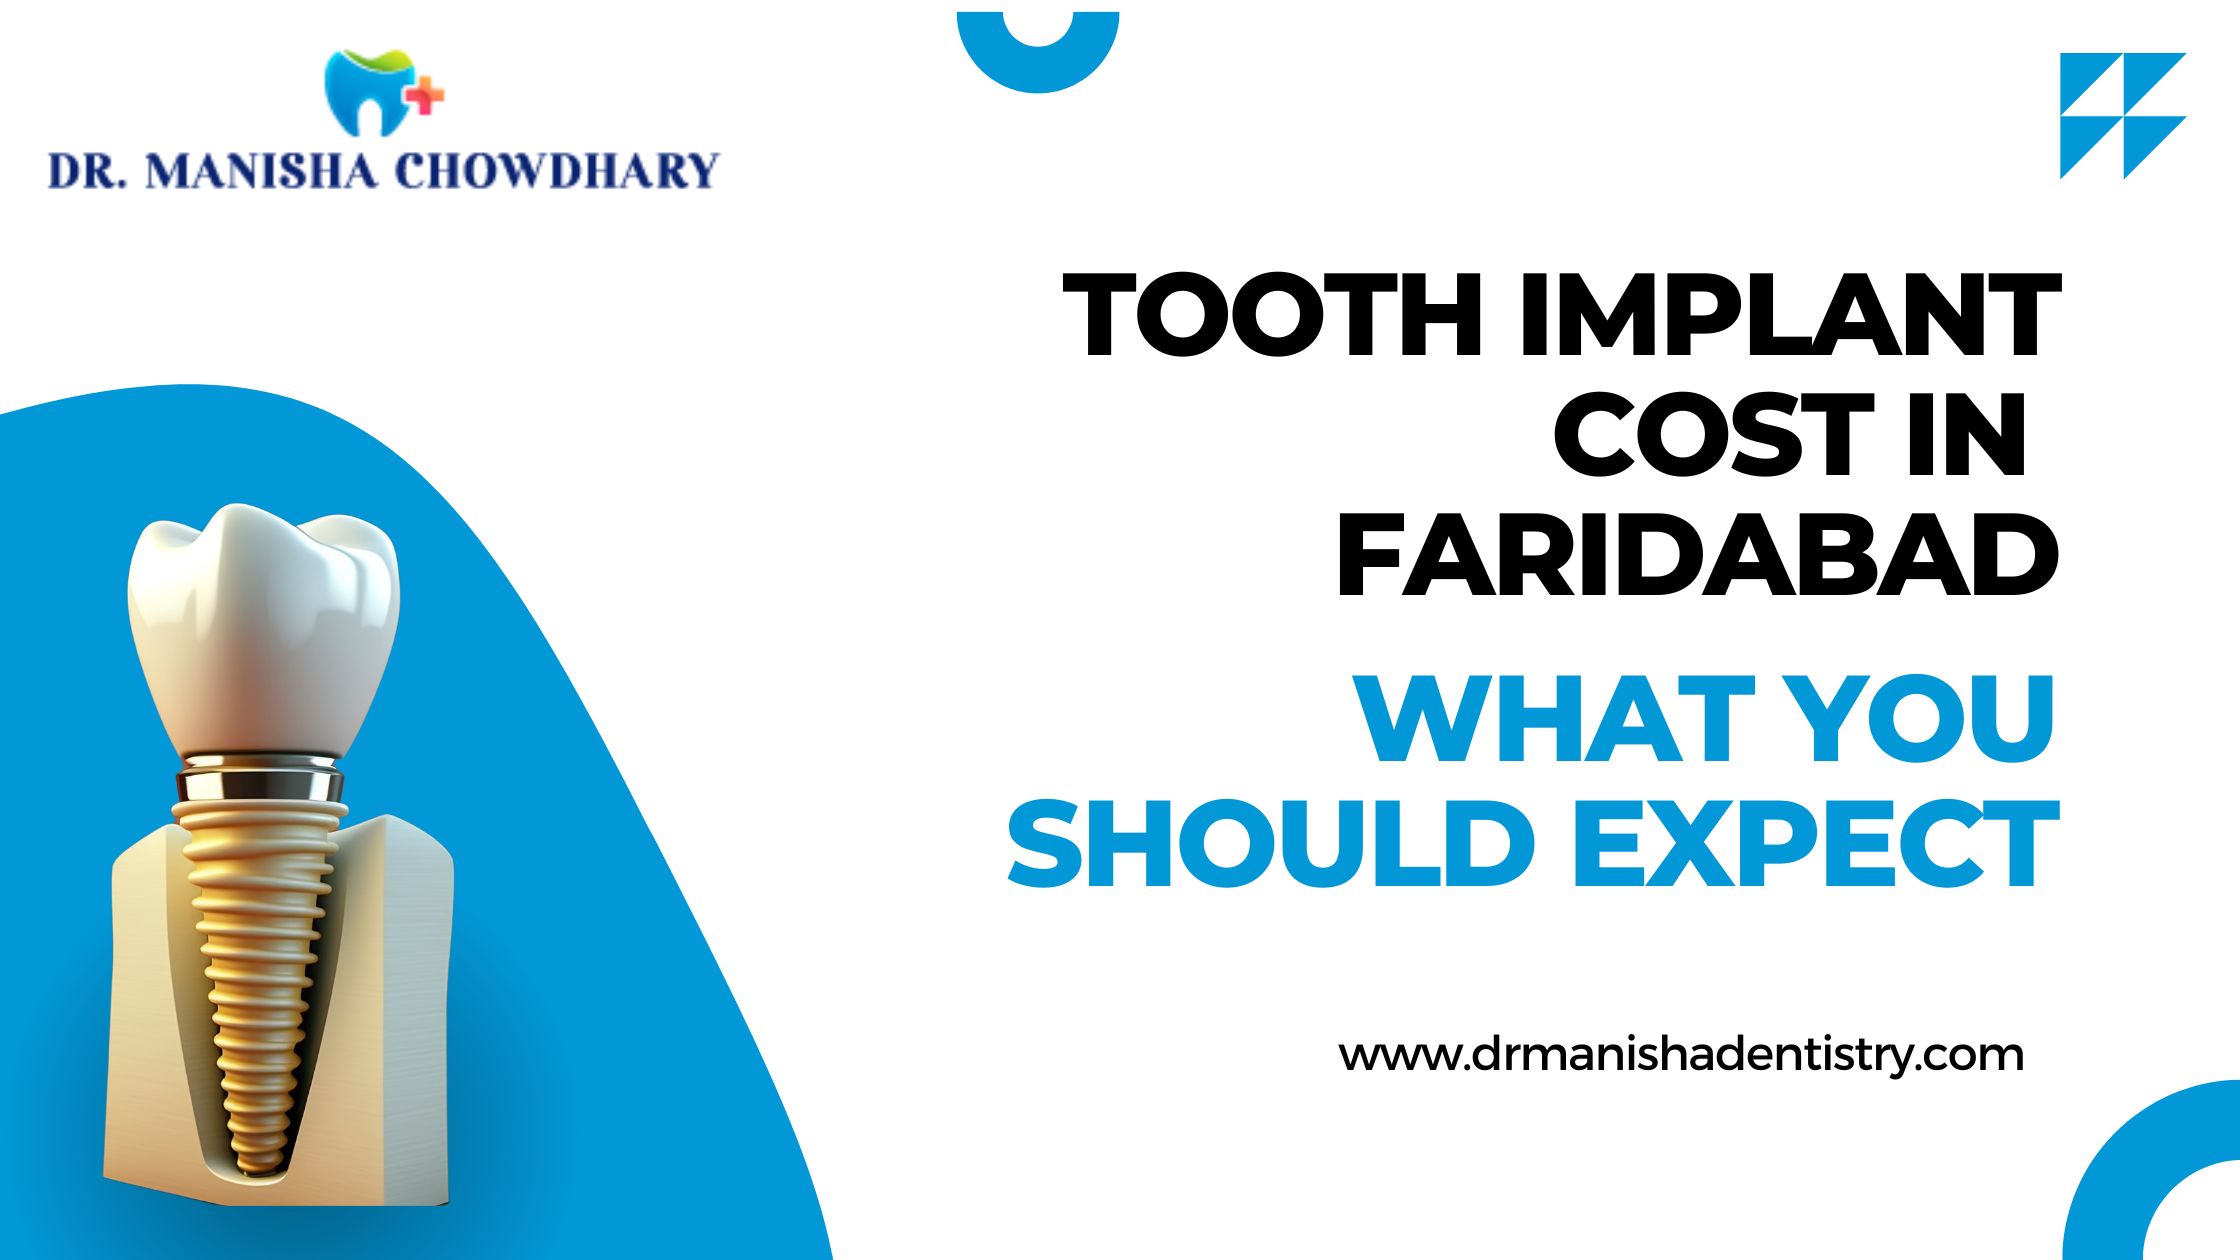 Tooth Implant cost in faridabad